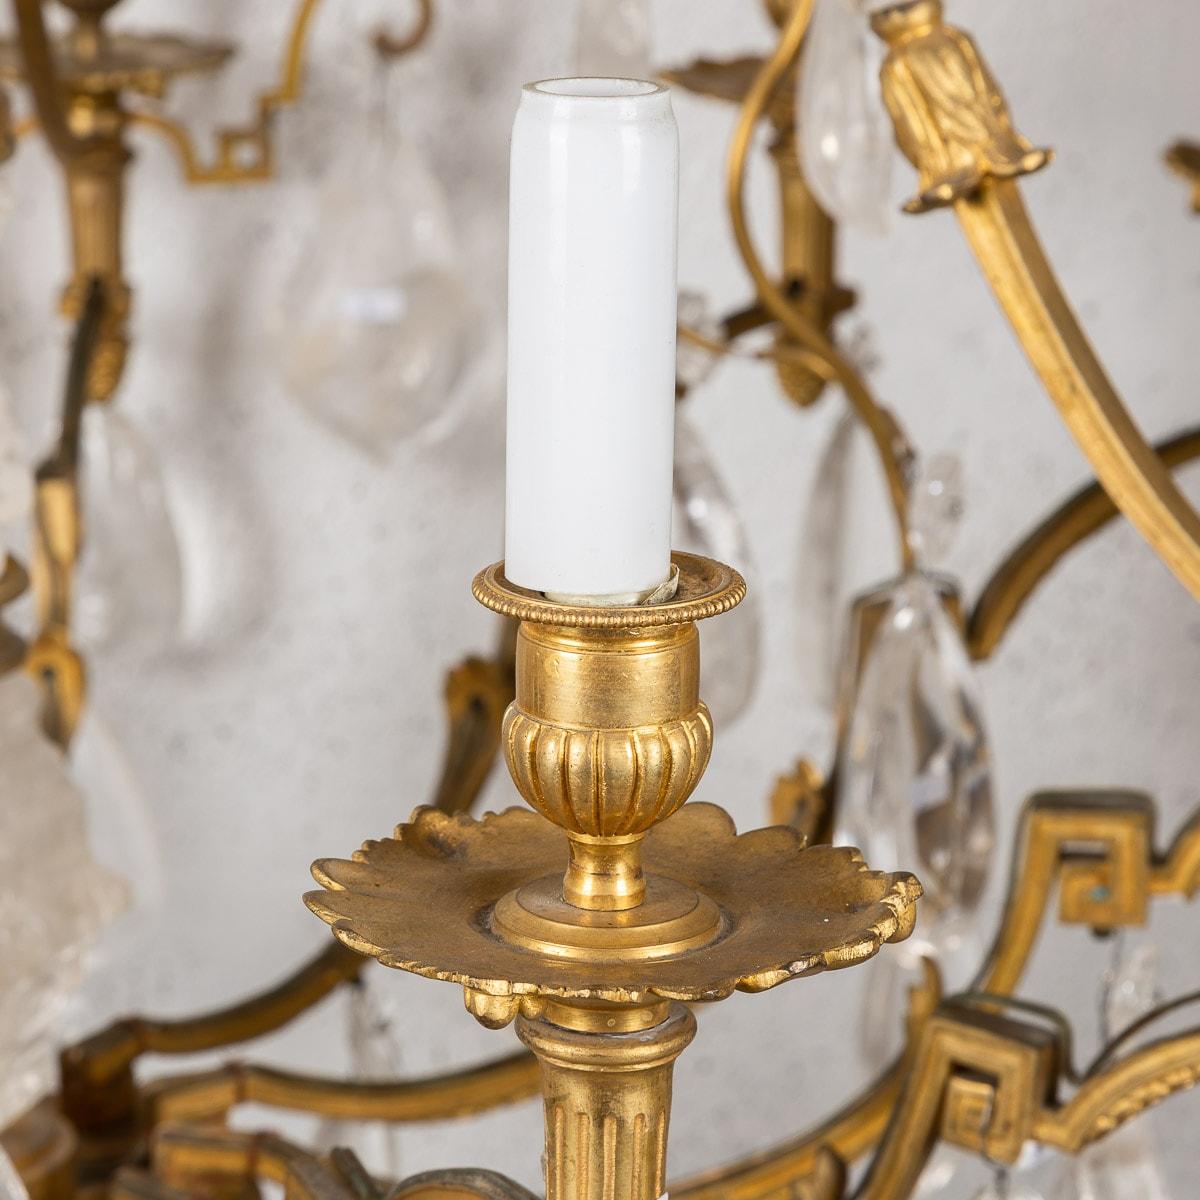 Antique late 18th Century French Impressive ormolu bronze and rock crystal chandelier. Each natural rock crystal crystal has been hand cut into pear shaped droplets with small flowers above and with a spherical faceted crystal ball underhanging. The